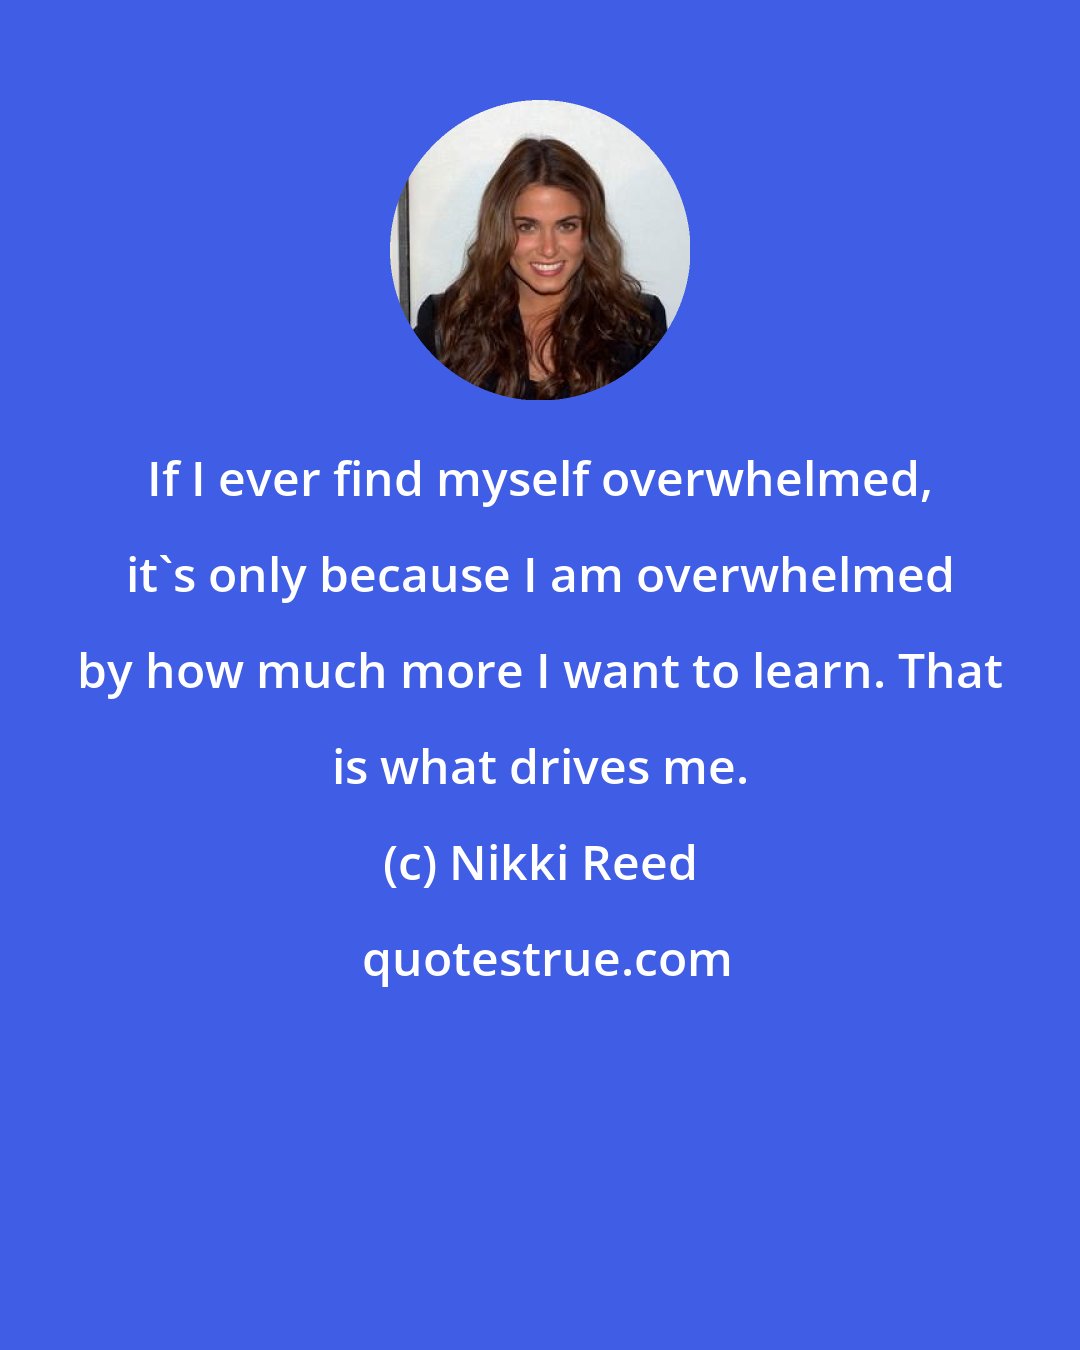 Nikki Reed: If I ever find myself overwhelmed, it's only because I am overwhelmed by how much more I want to learn. That is what drives me.